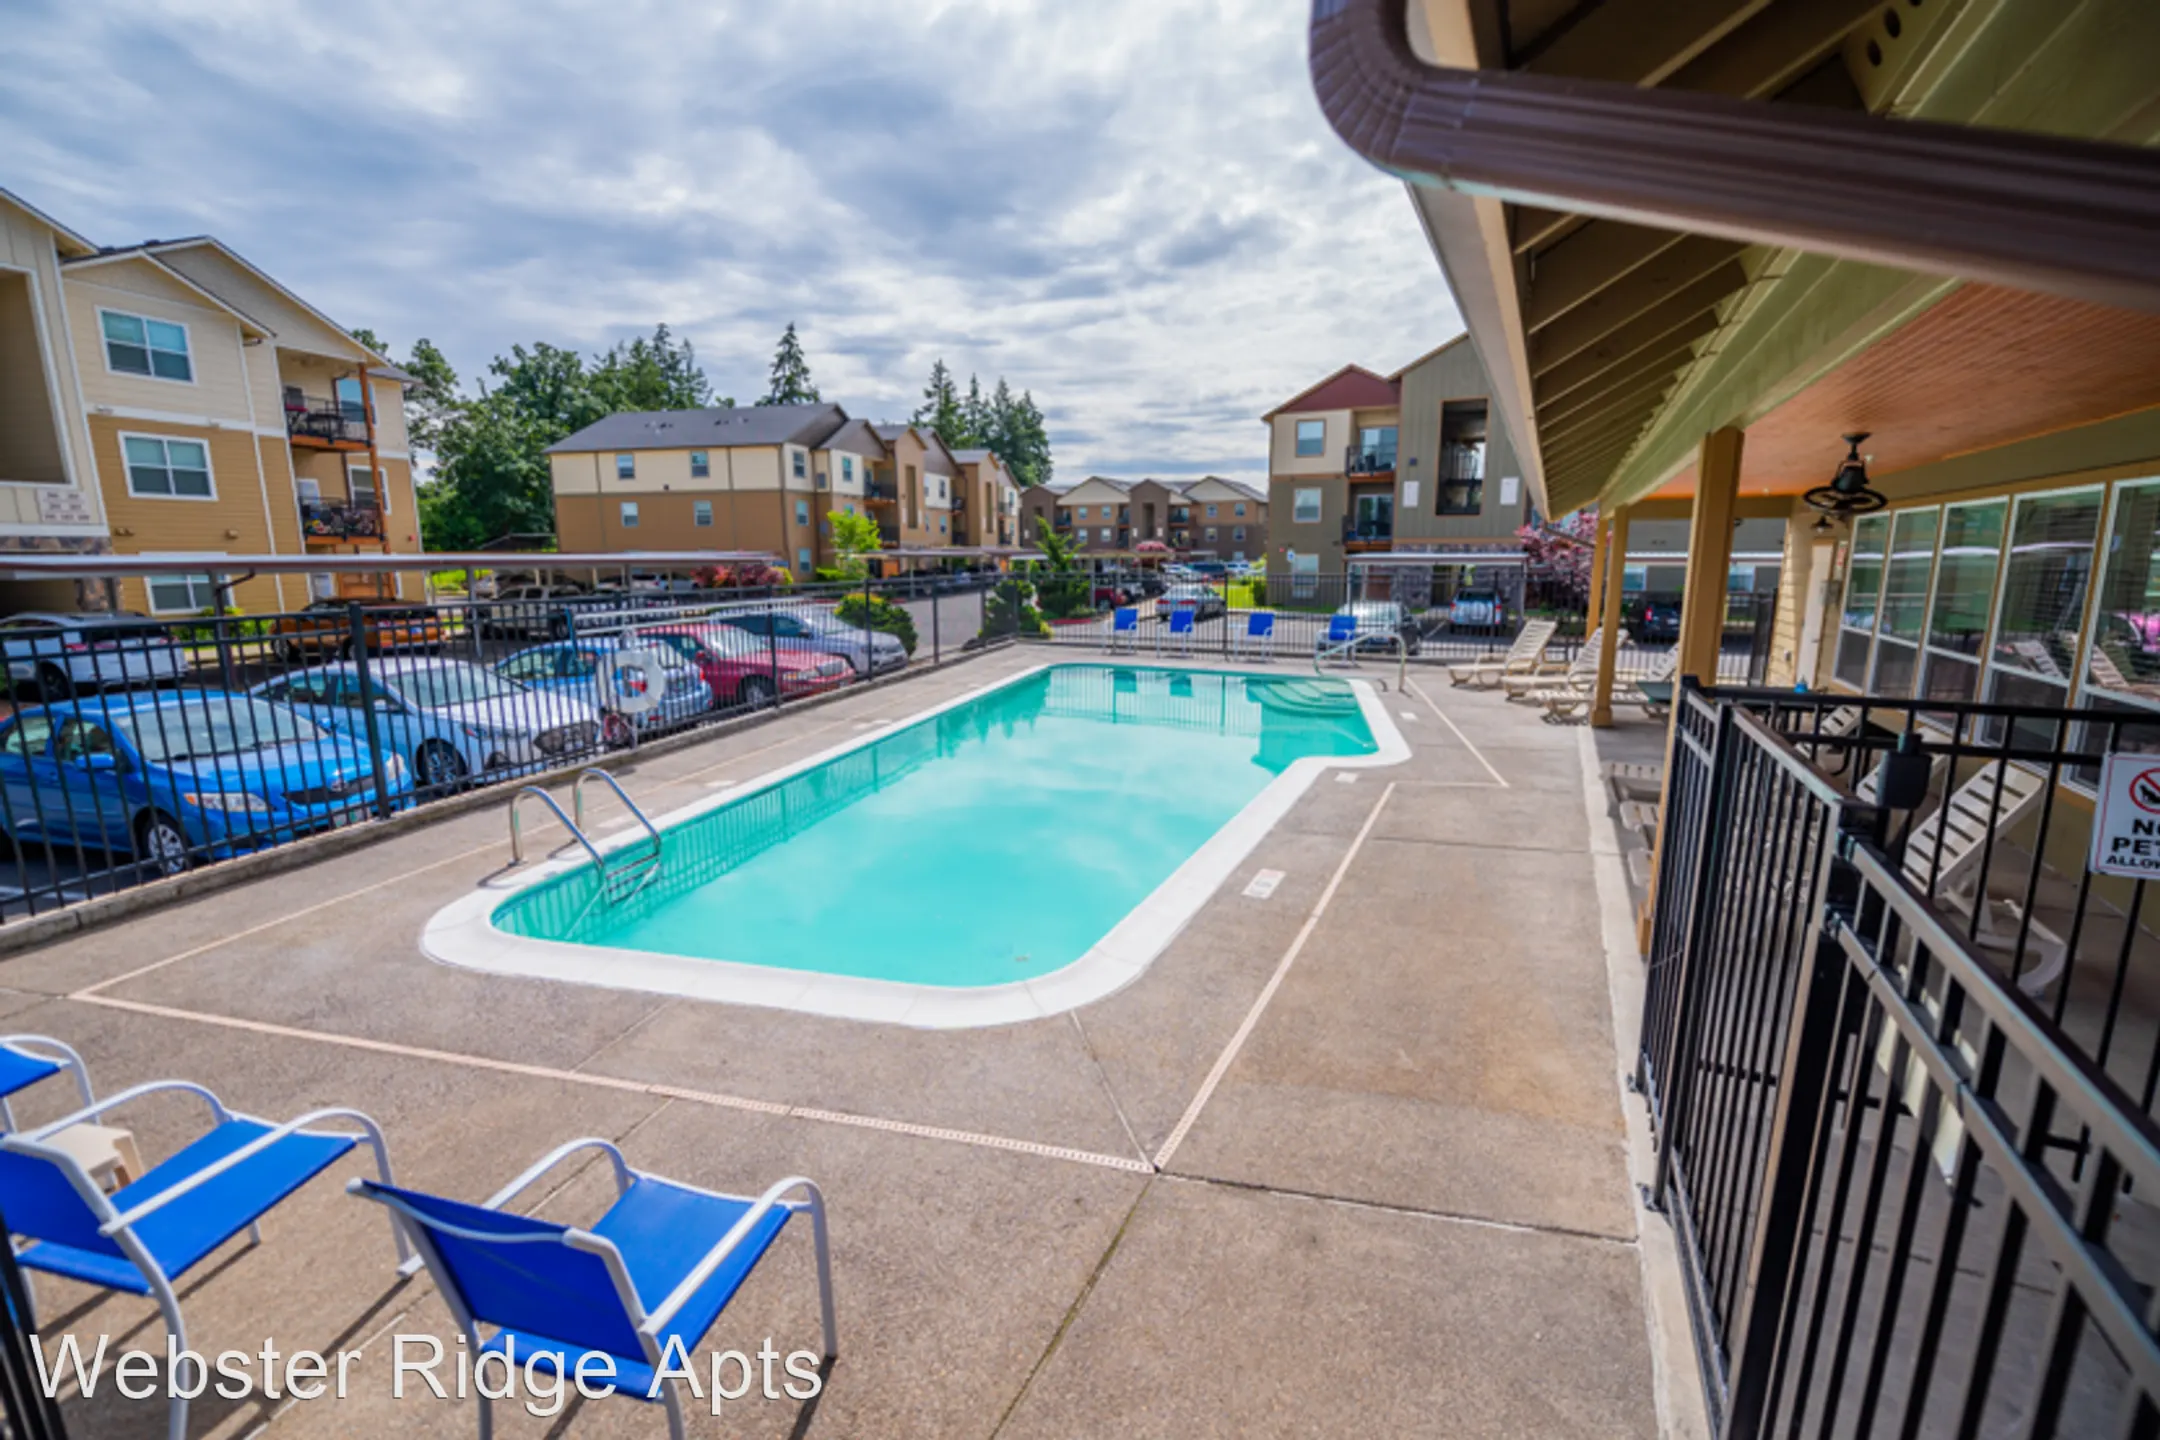 Pool - Webster Ridge Apartments - Gladstone, OR